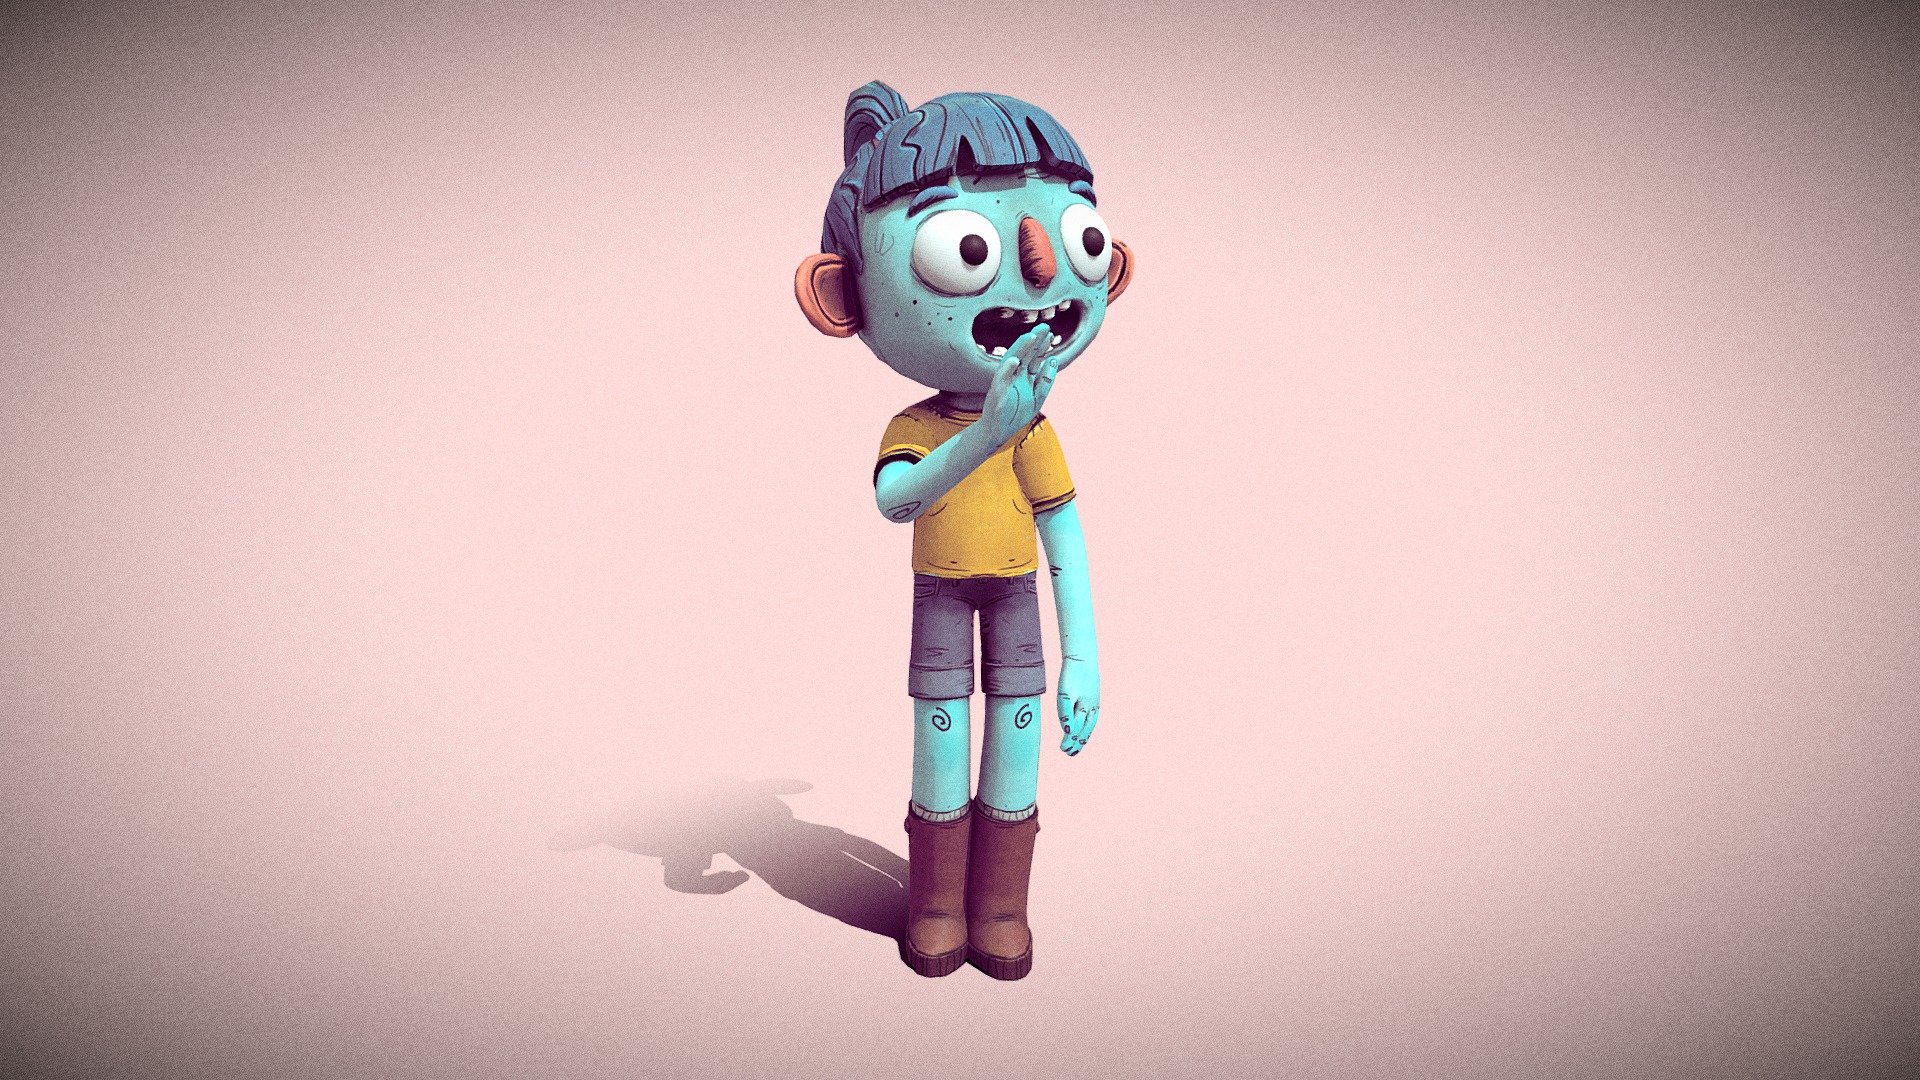 Was playing around with the texture and tried to give it a sketchy look :) Very much an experiment haha 3d model